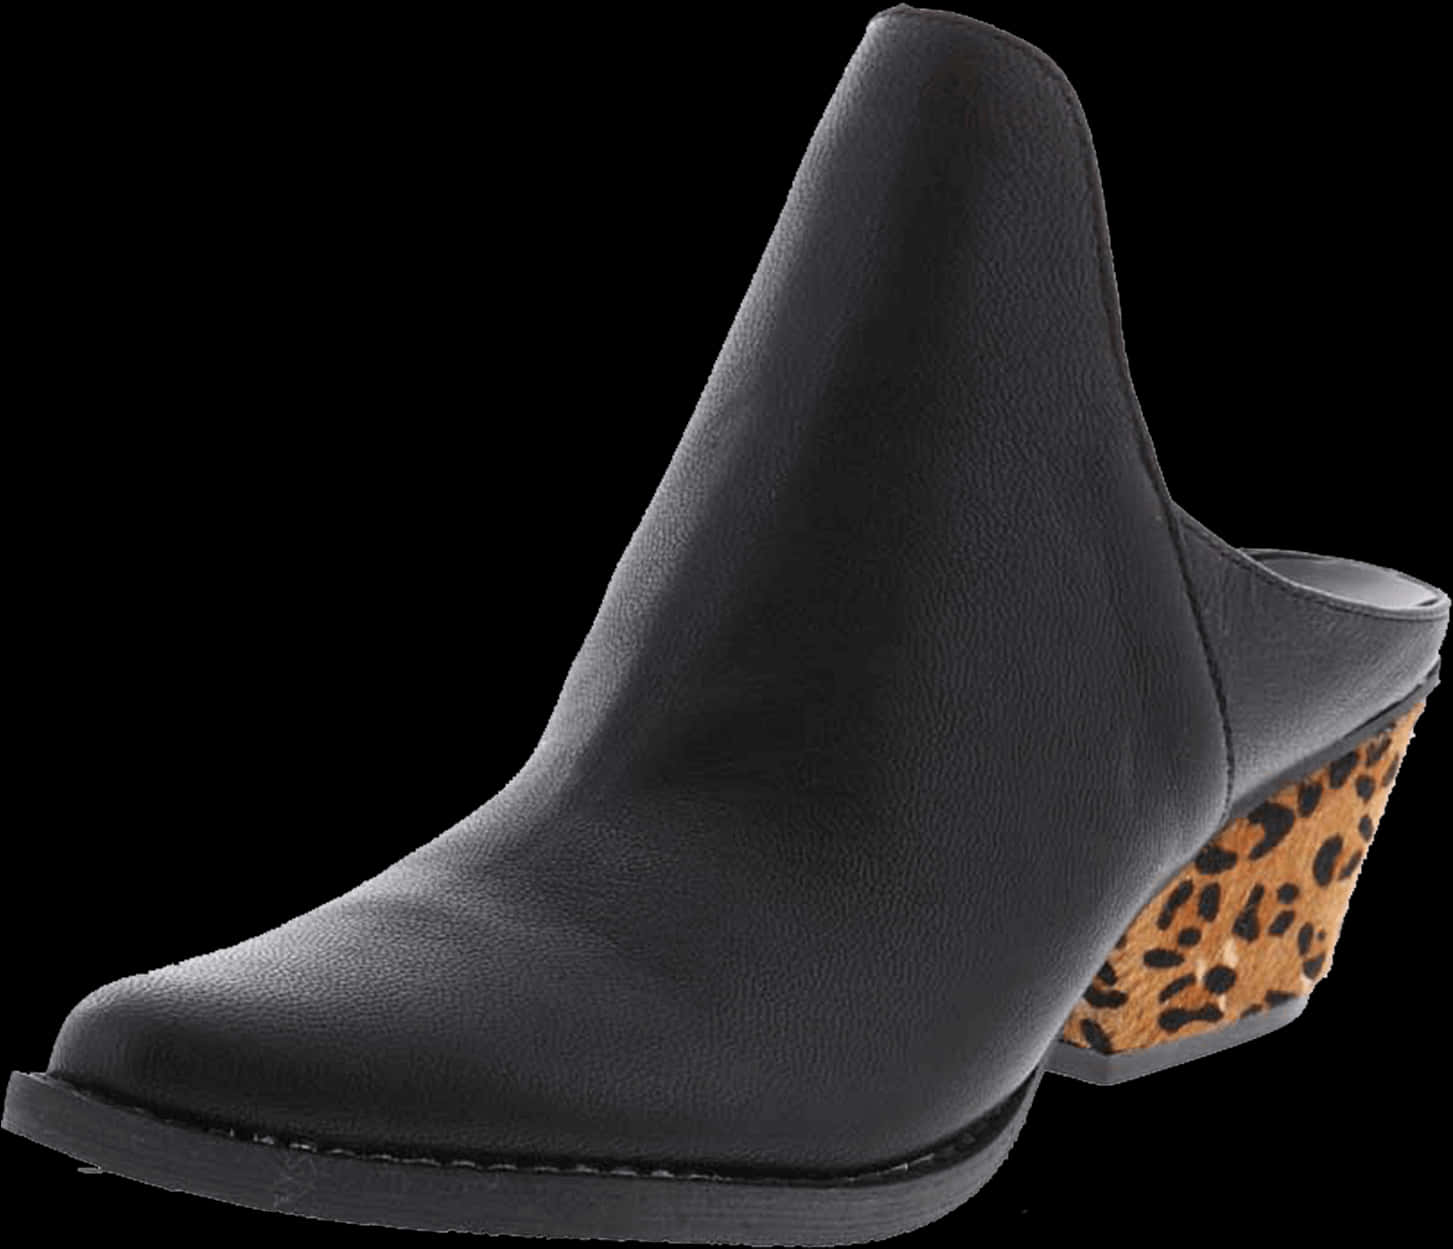 A Black Leather Shoe With Leopard Print On The Heel PNG